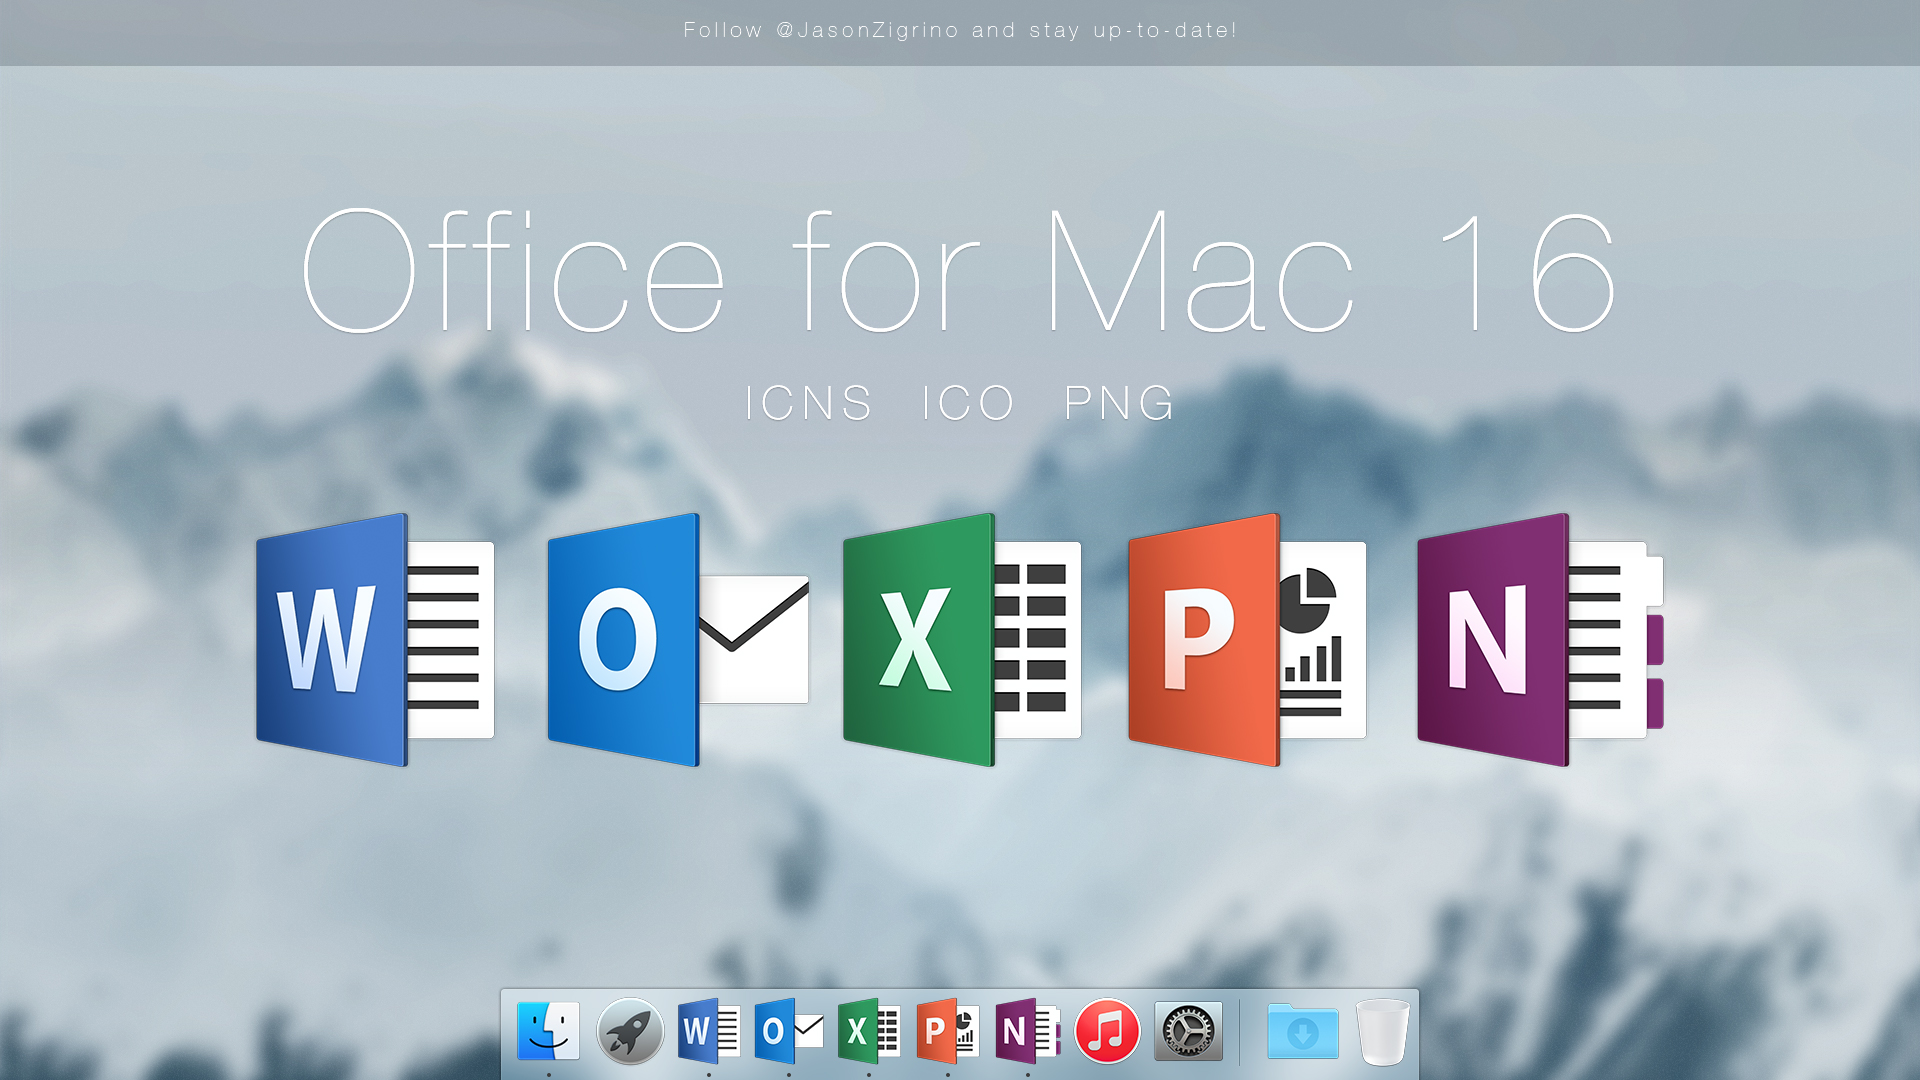 what version is word for mac in office 2016